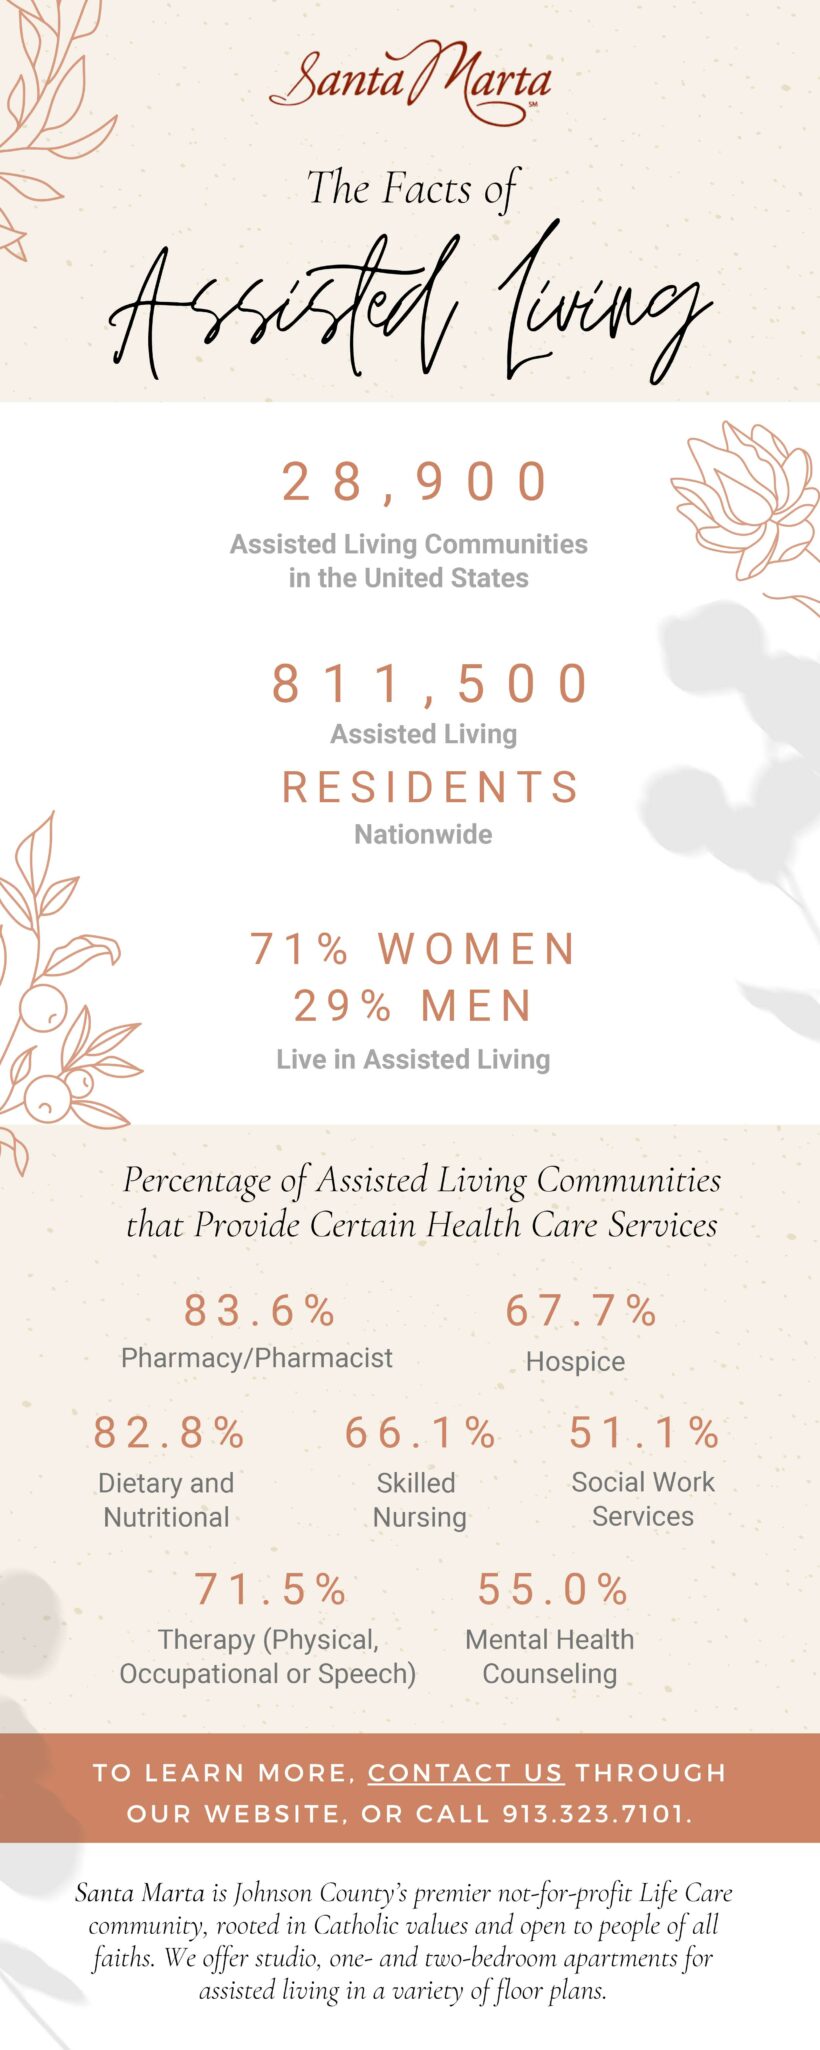 The Facts of Assisted Living infographic